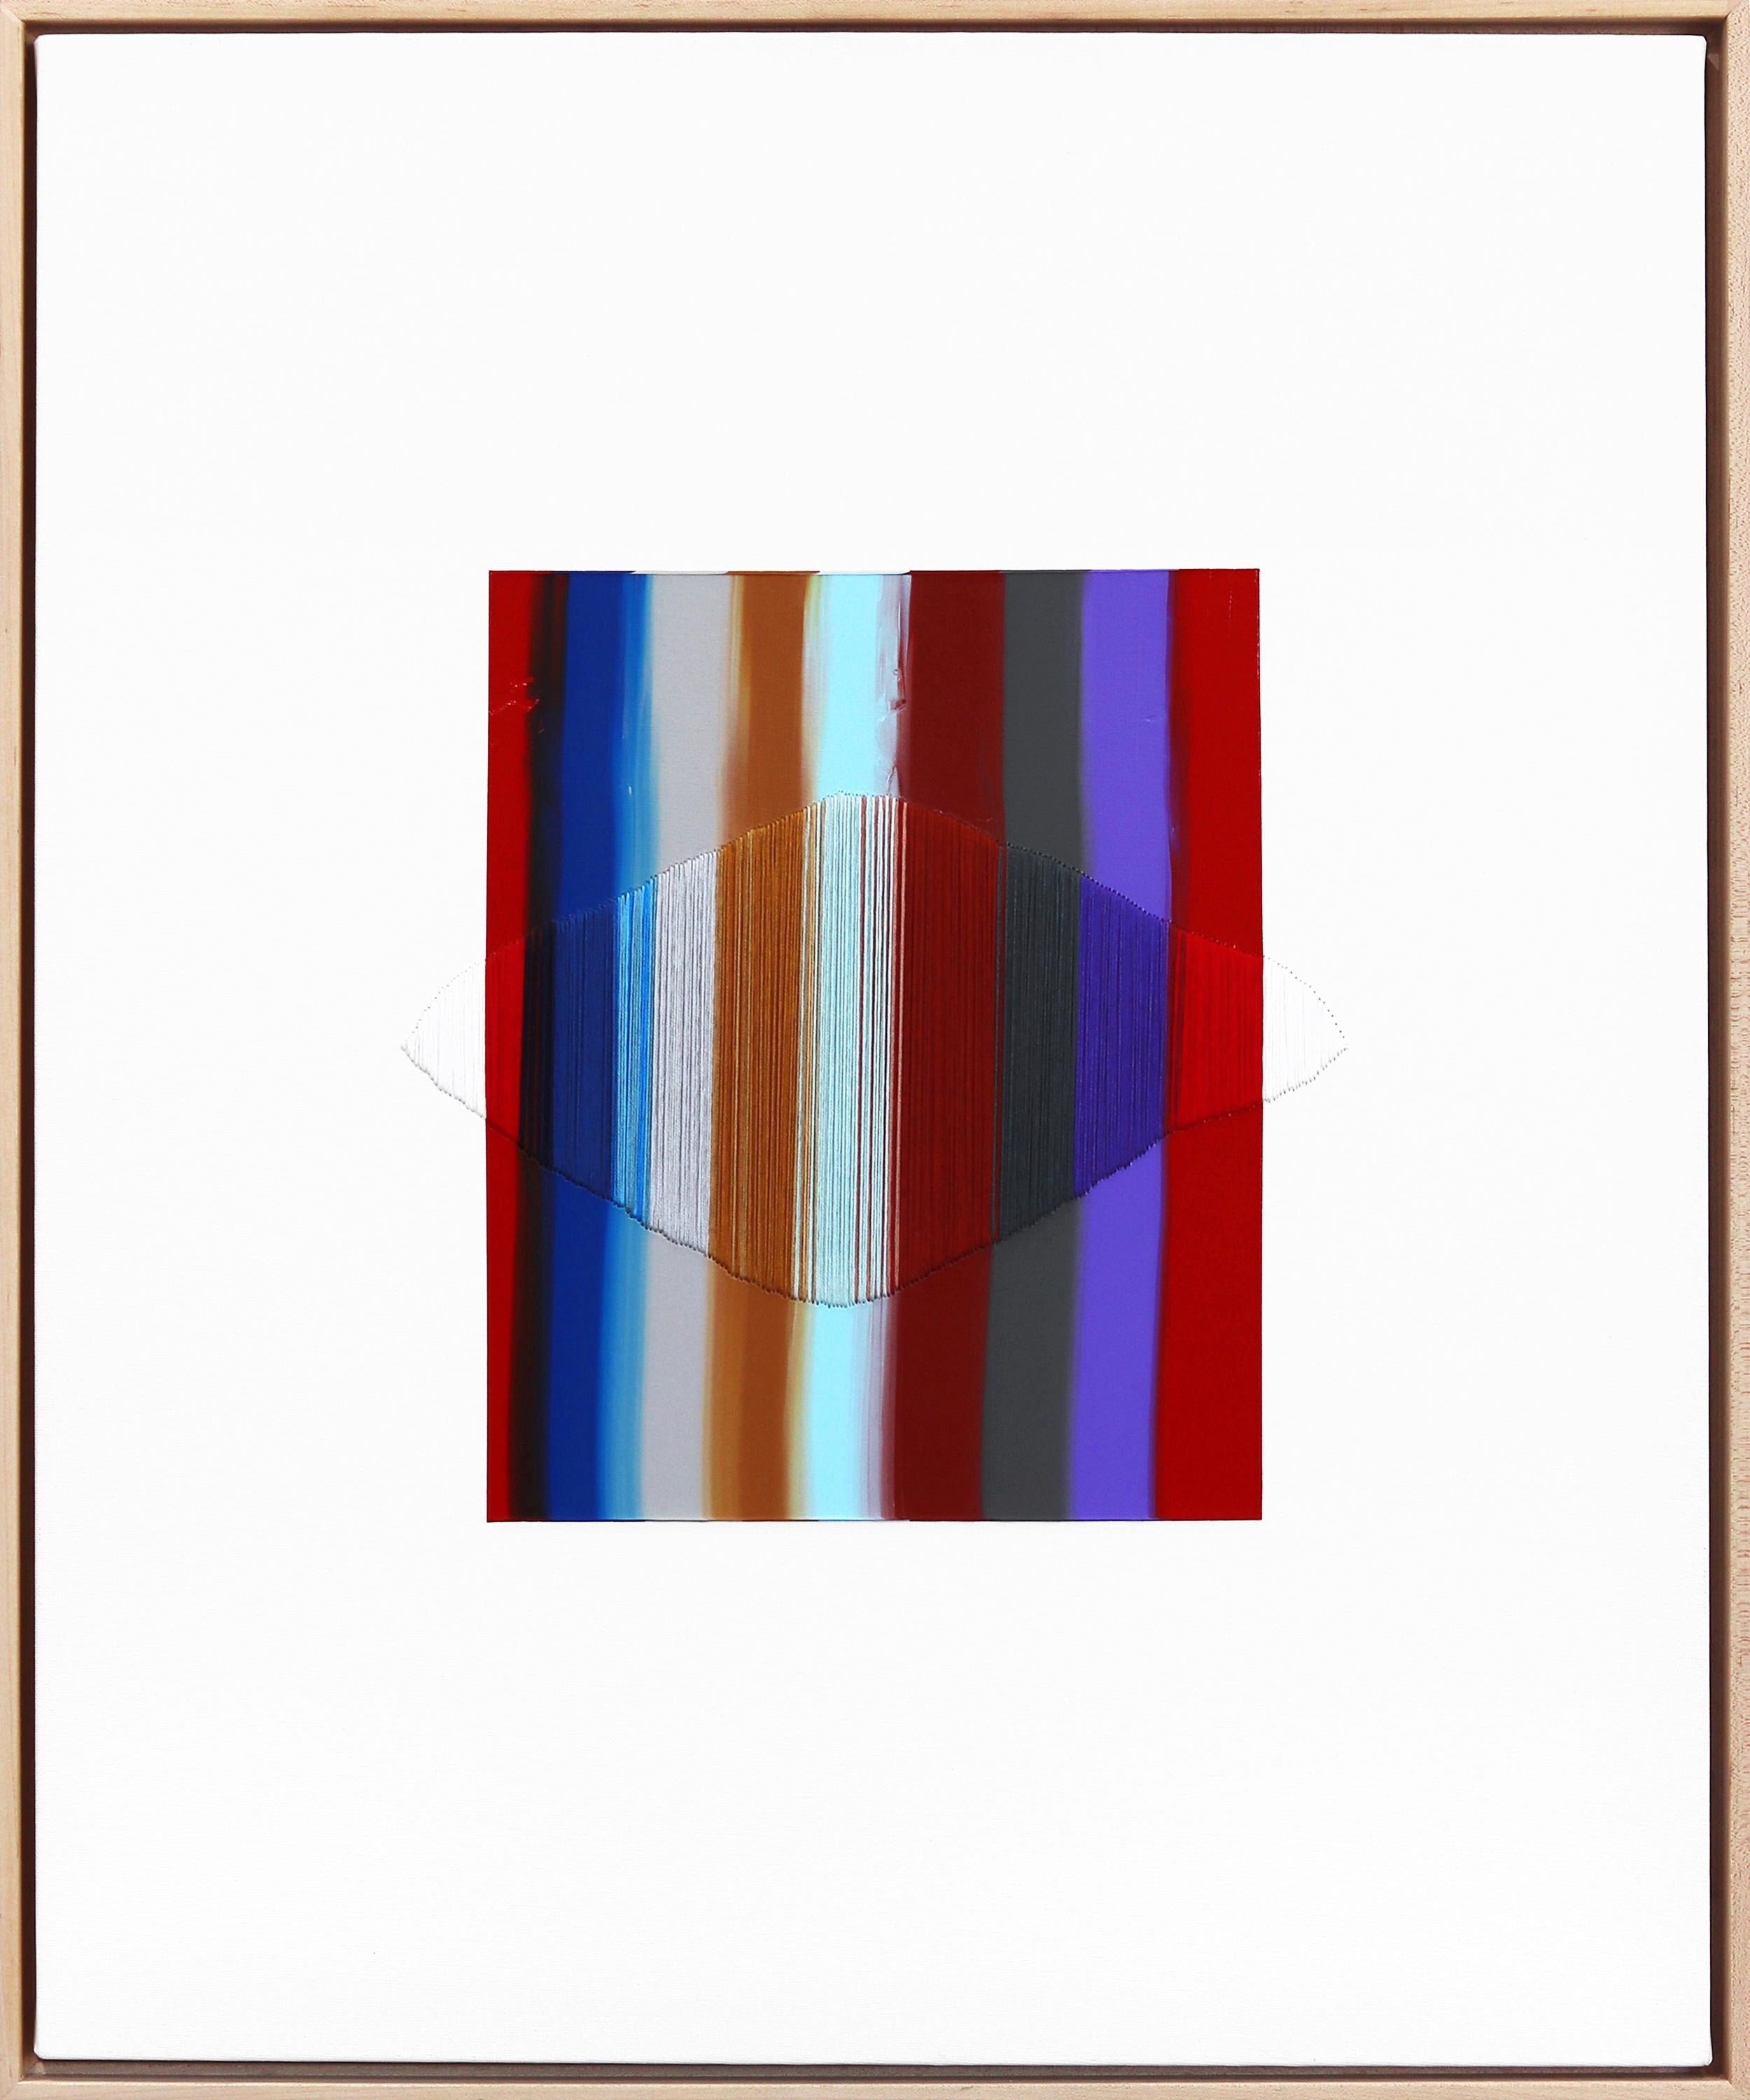 Through This Window, Thin Rivers - Framed Colorful Abstract Art - Mixed Media Art by Raul de la Torre